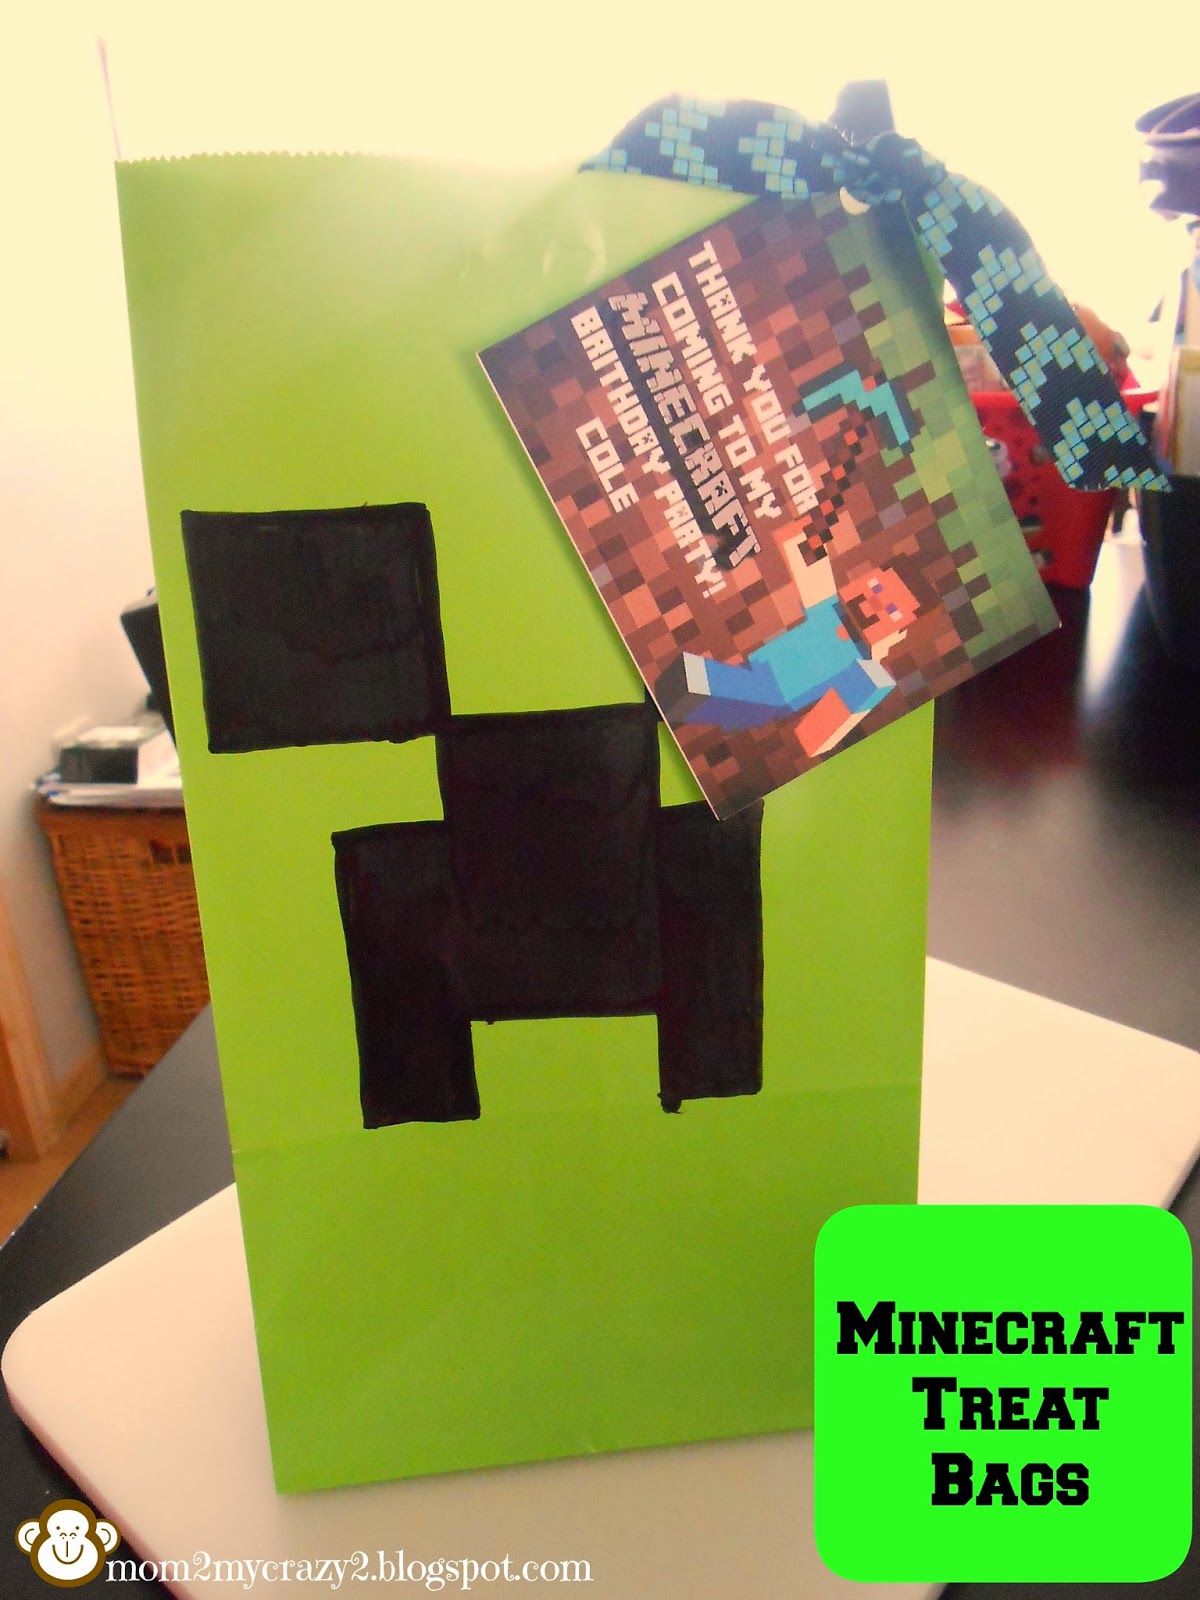 DIY Minecraft party bags using cheap black paper sacks and printed